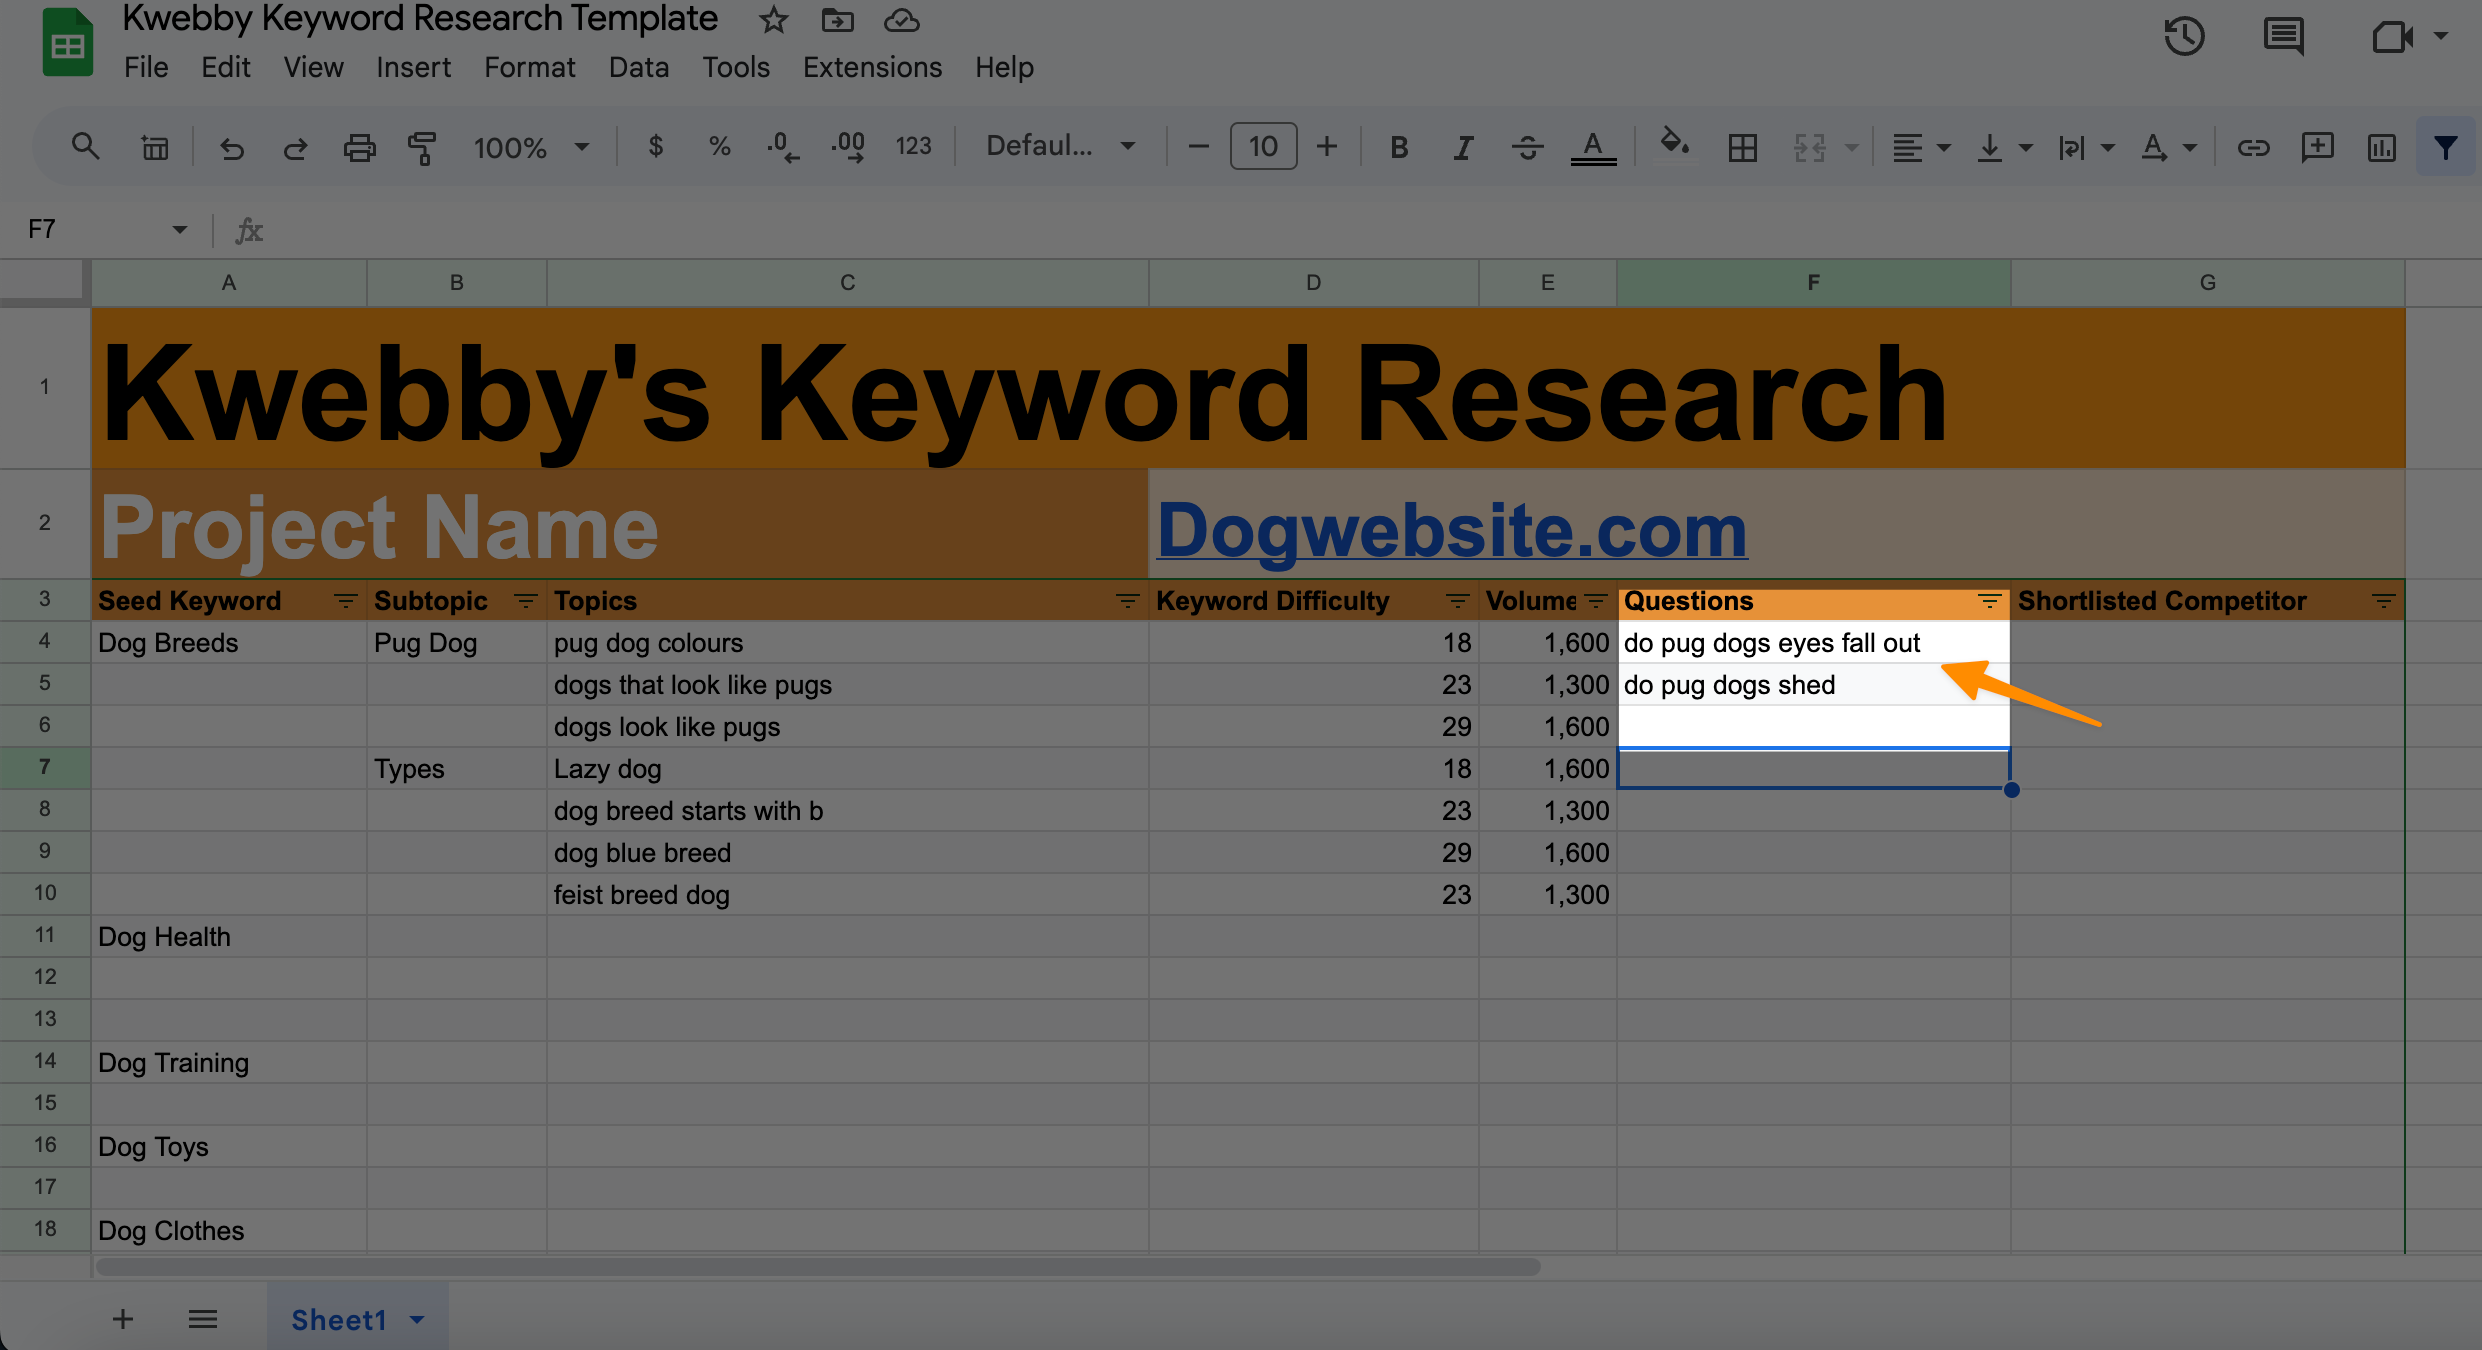 How to do Keyword Research for New Sites to Get 100k Traffic (Template Inside) 11